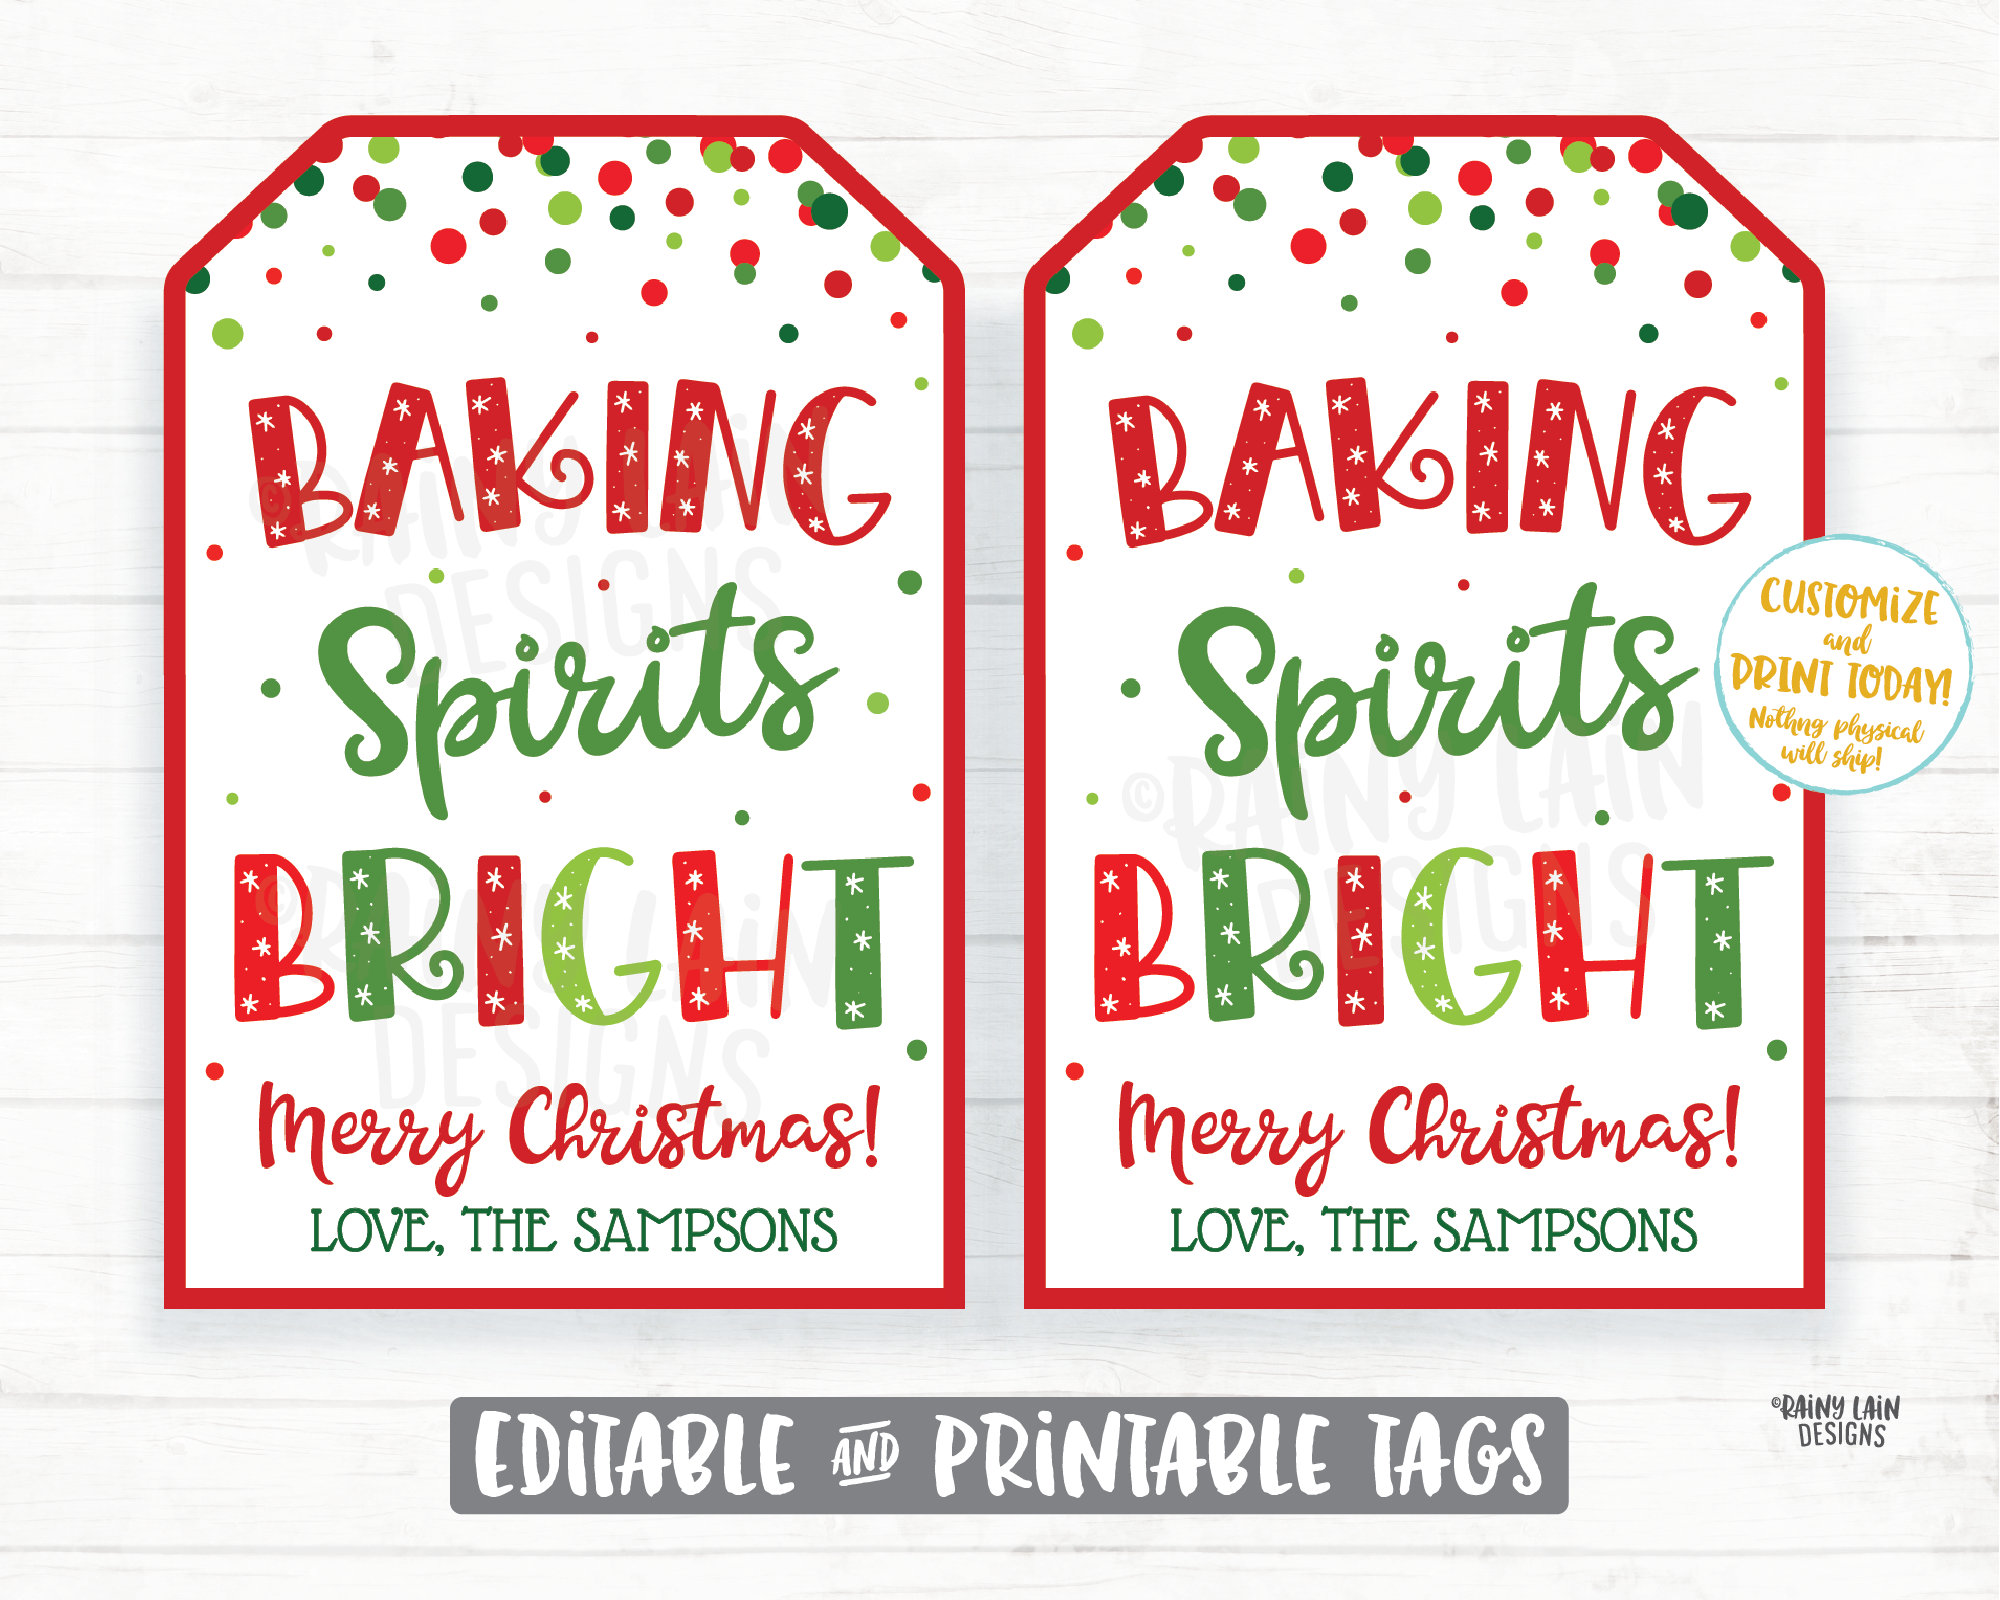 Baking Spirits Bright: Easy Gifts with FREE Printables - Crisp Collective